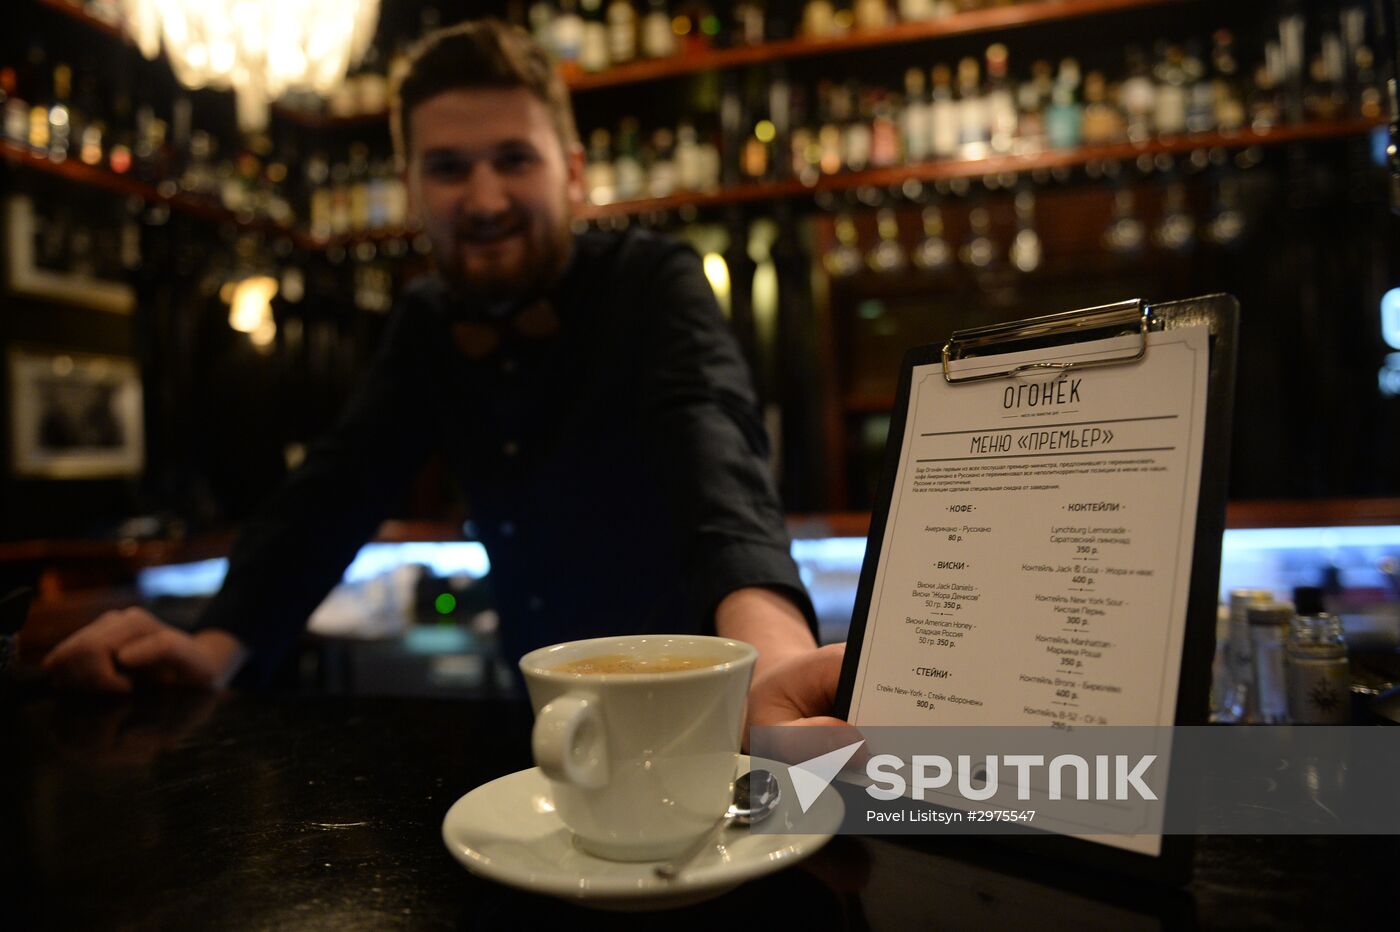 Russiano coffee appeared in Russian cafes